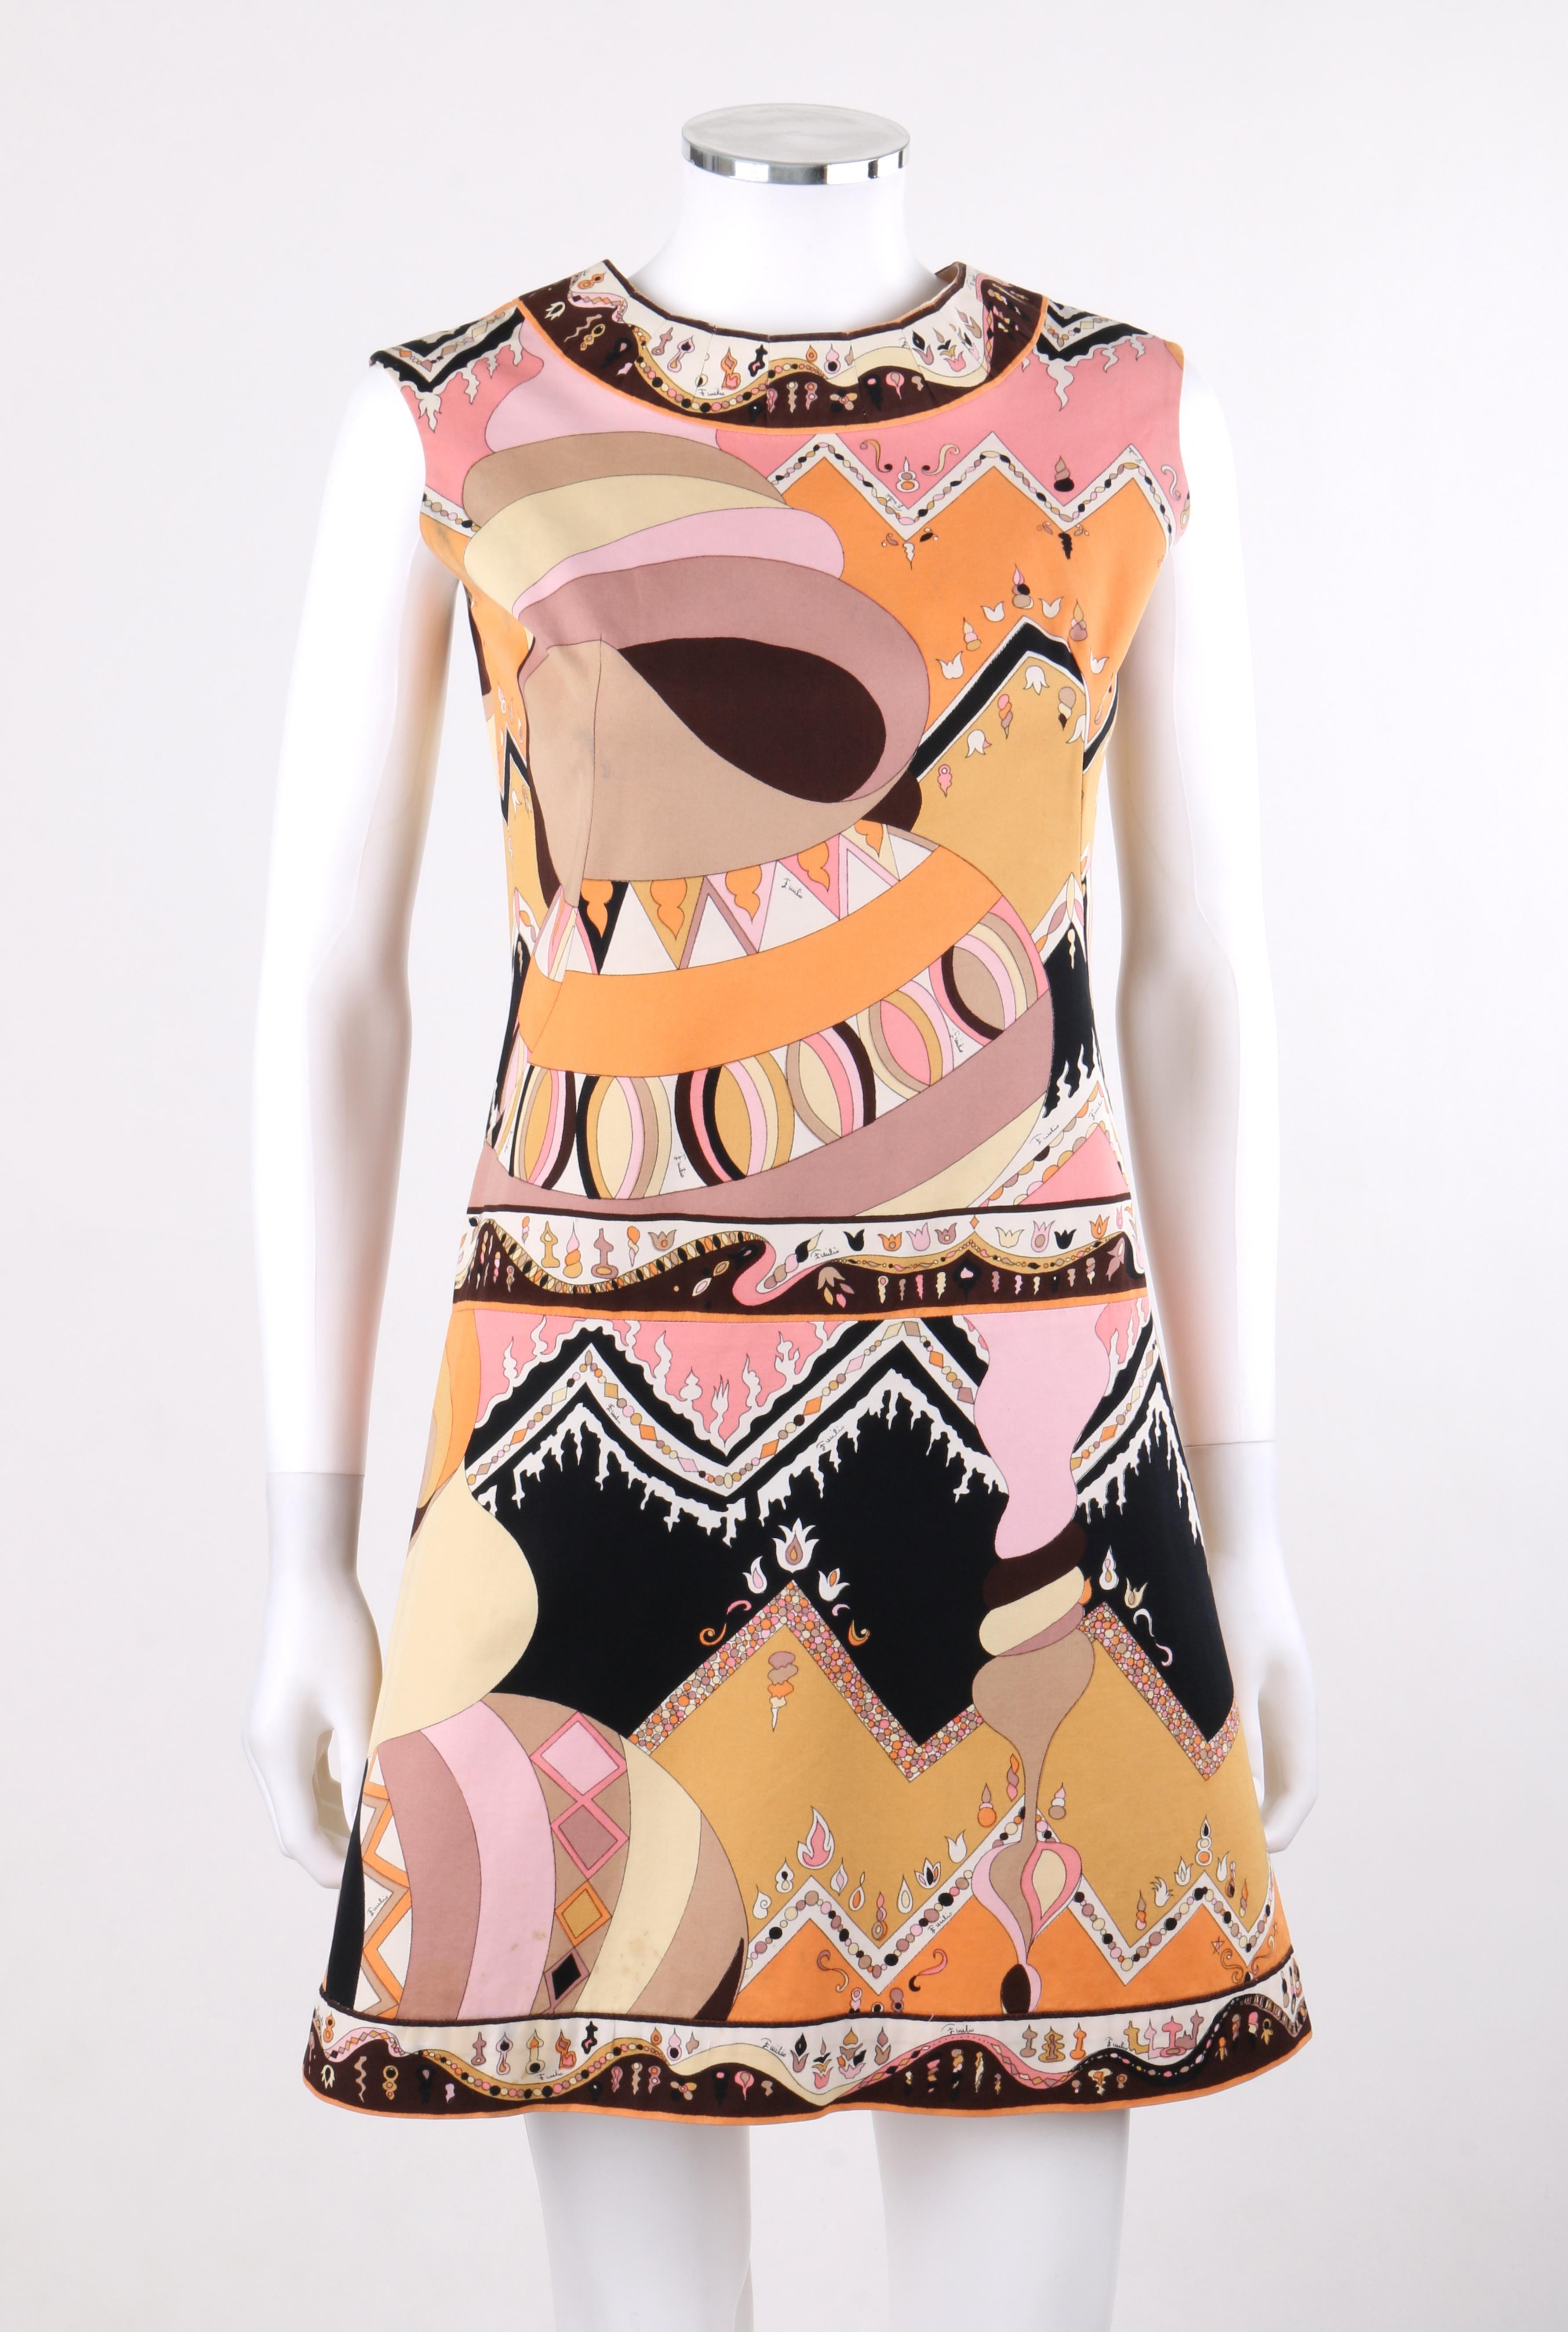 DESCRIPTION: EMILIO PUCCI c.1960's Mod Op Art Signature Print Sleeveless A-Line Dress
 
Circa: c.1960’s
Label(s): Emilio Pucci; Exclusively For Saks Fifth Avenue
Style: A-line dress
Color(s): Multi in shades of brown, beige, pink, orange, gold,